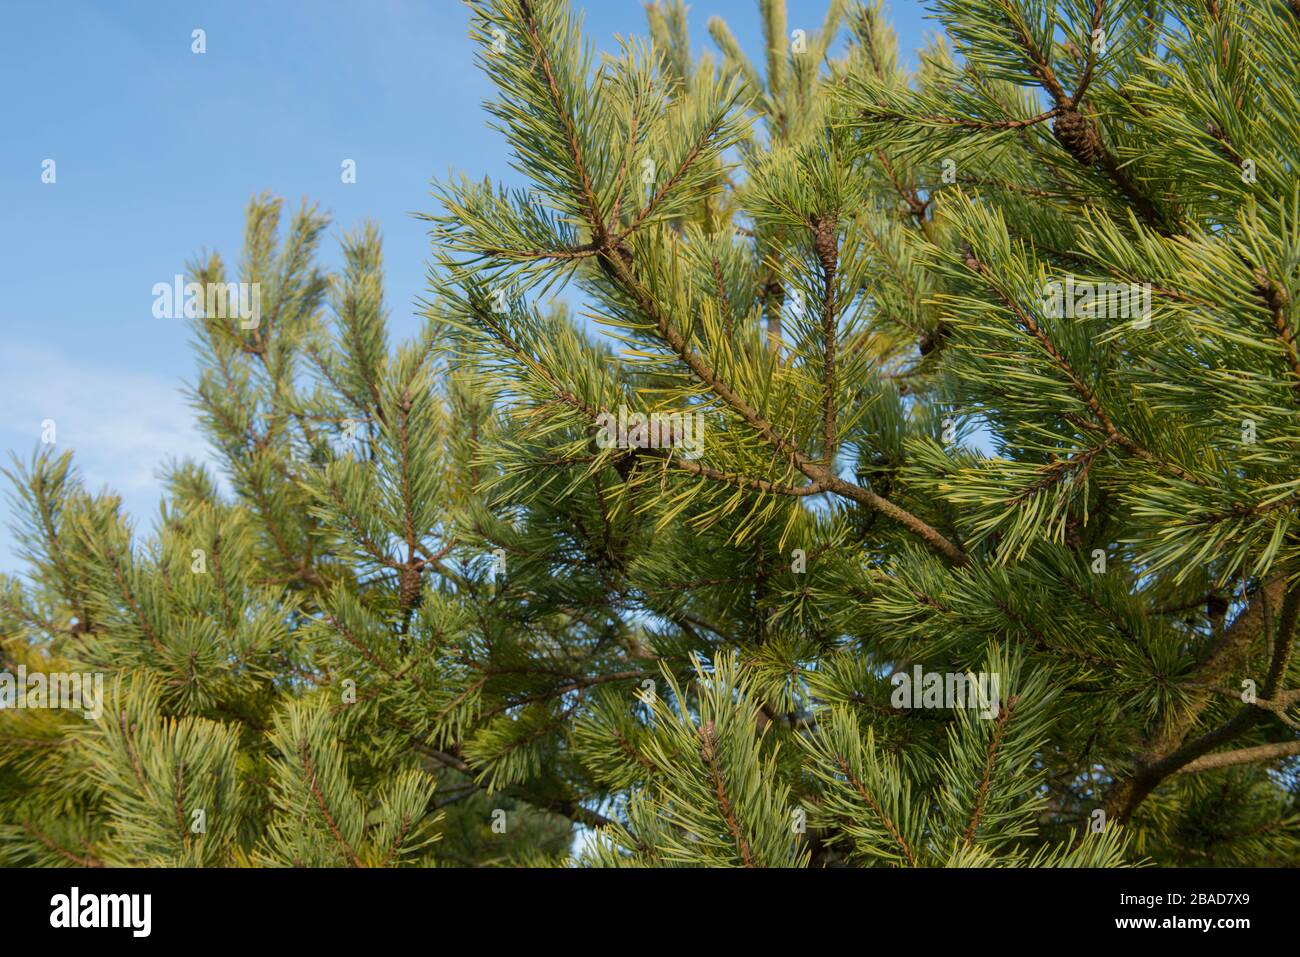 Green Foliage of an Evergreen Scots Pine Shrub (Pinus sylvestris 'Gold Coin') with a Bright Blue Sky Background in a Garden in Rural Devon,England,UK Stock Photo